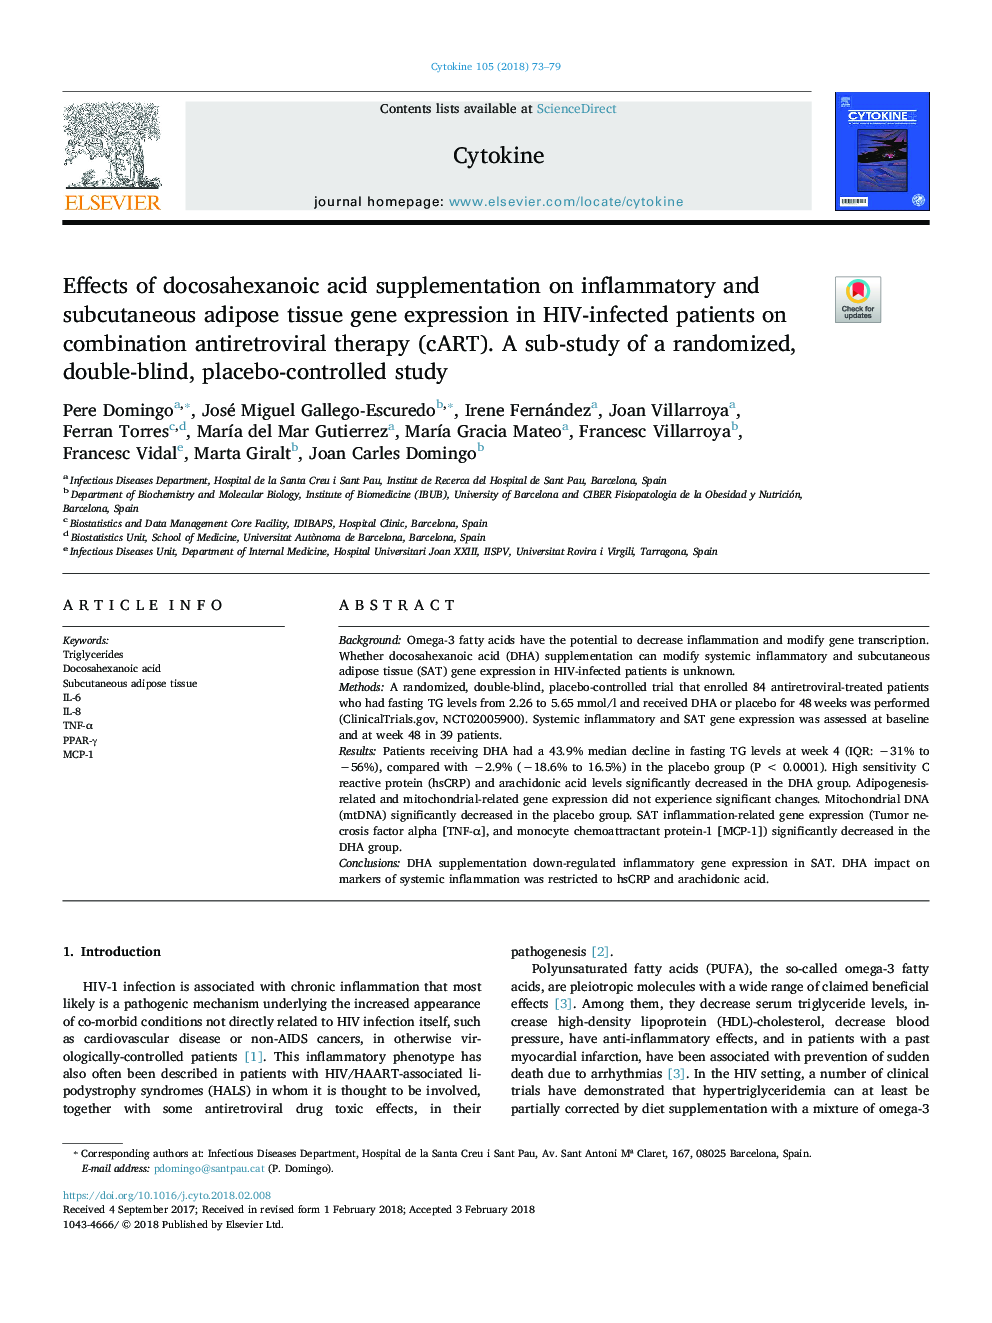 Effects of docosahexanoic acid supplementation on inflammatory and subcutaneous adipose tissue gene expression in HIV-infected patients on combination antiretroviral therapy (cART). A sub-study of a randomized, double-blind, placebo-controlled study